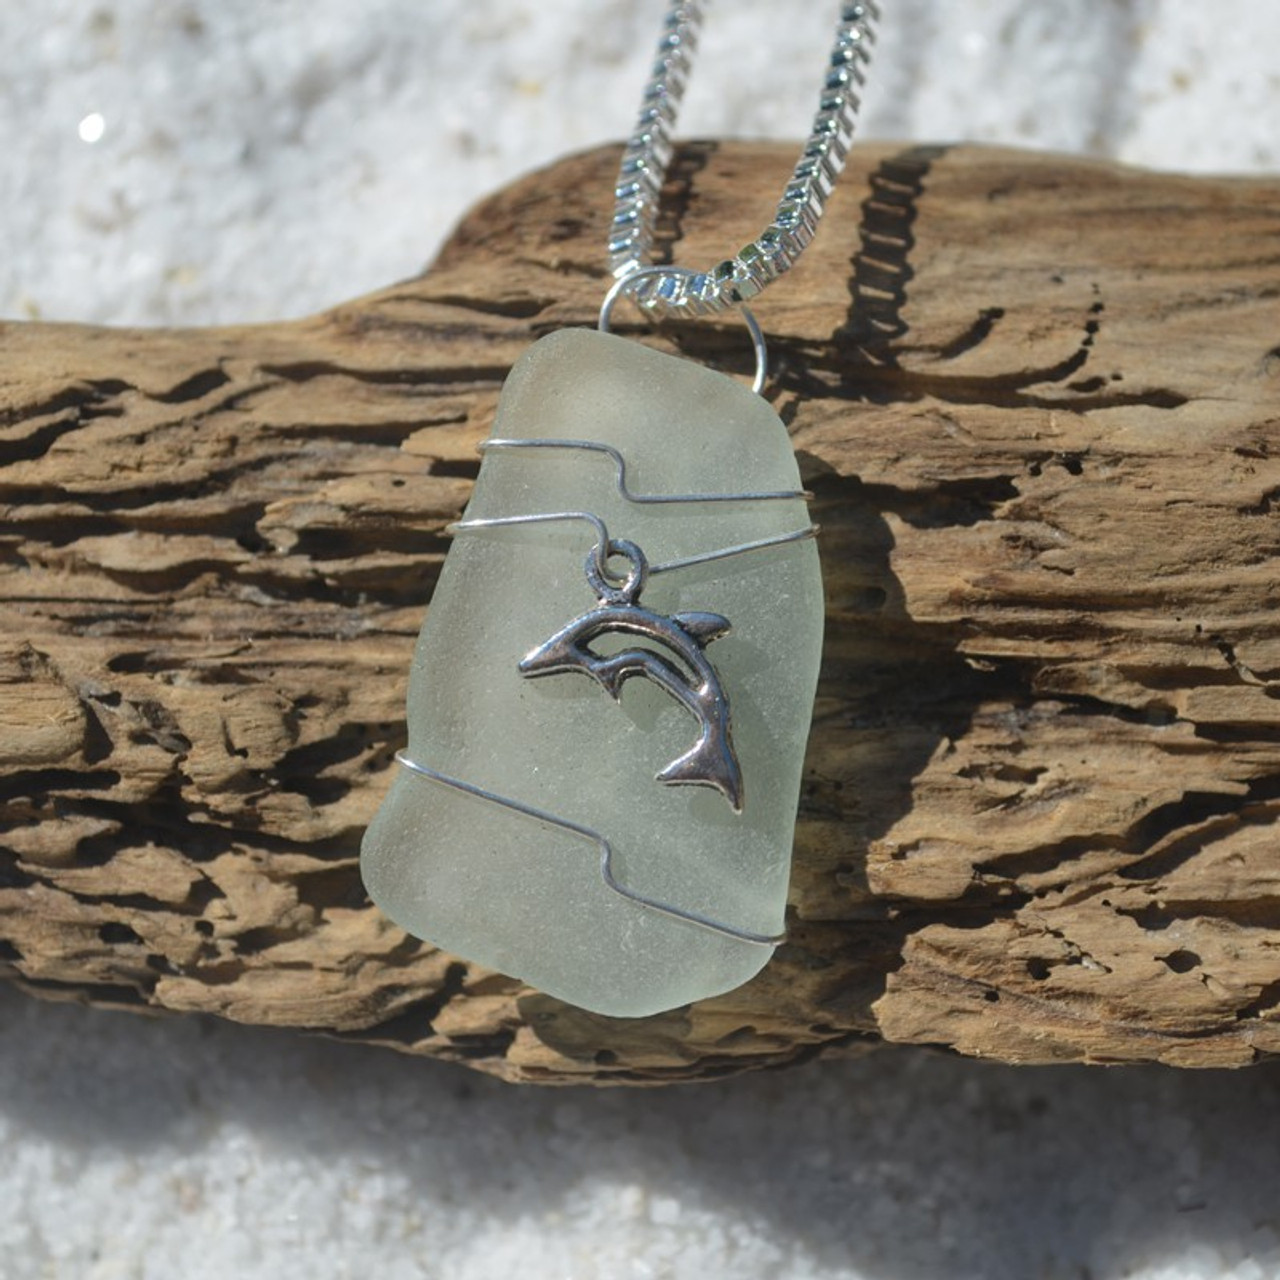 Genuine Sea Glass Necklace with a Silver Dolphin Charm - Choose the Color - Frosted, Green, Brown, or Aqua - Made to Order